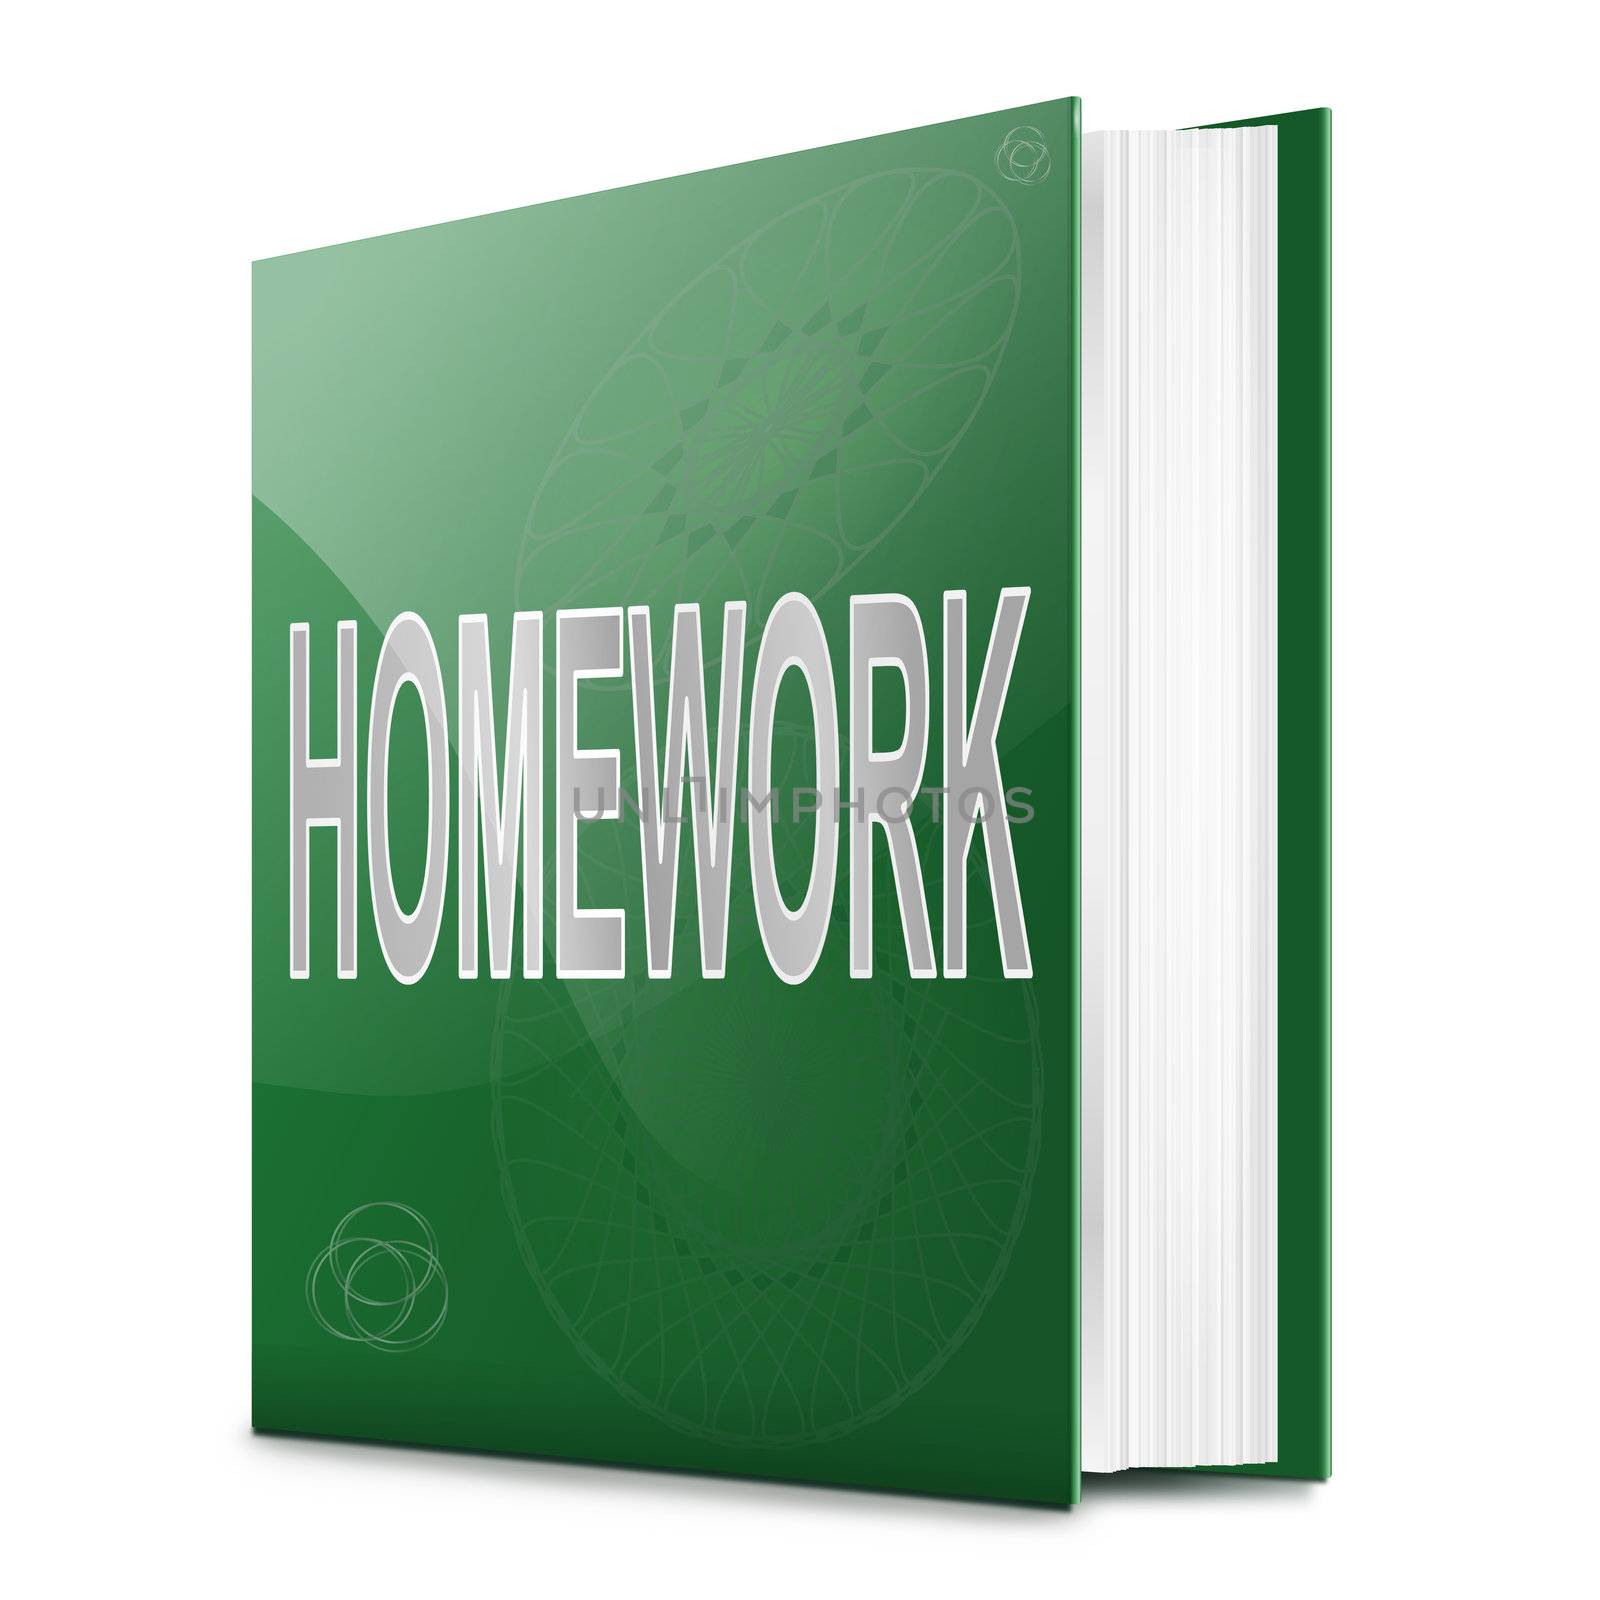 Illustration depicting a book with a homework concept title. White background.